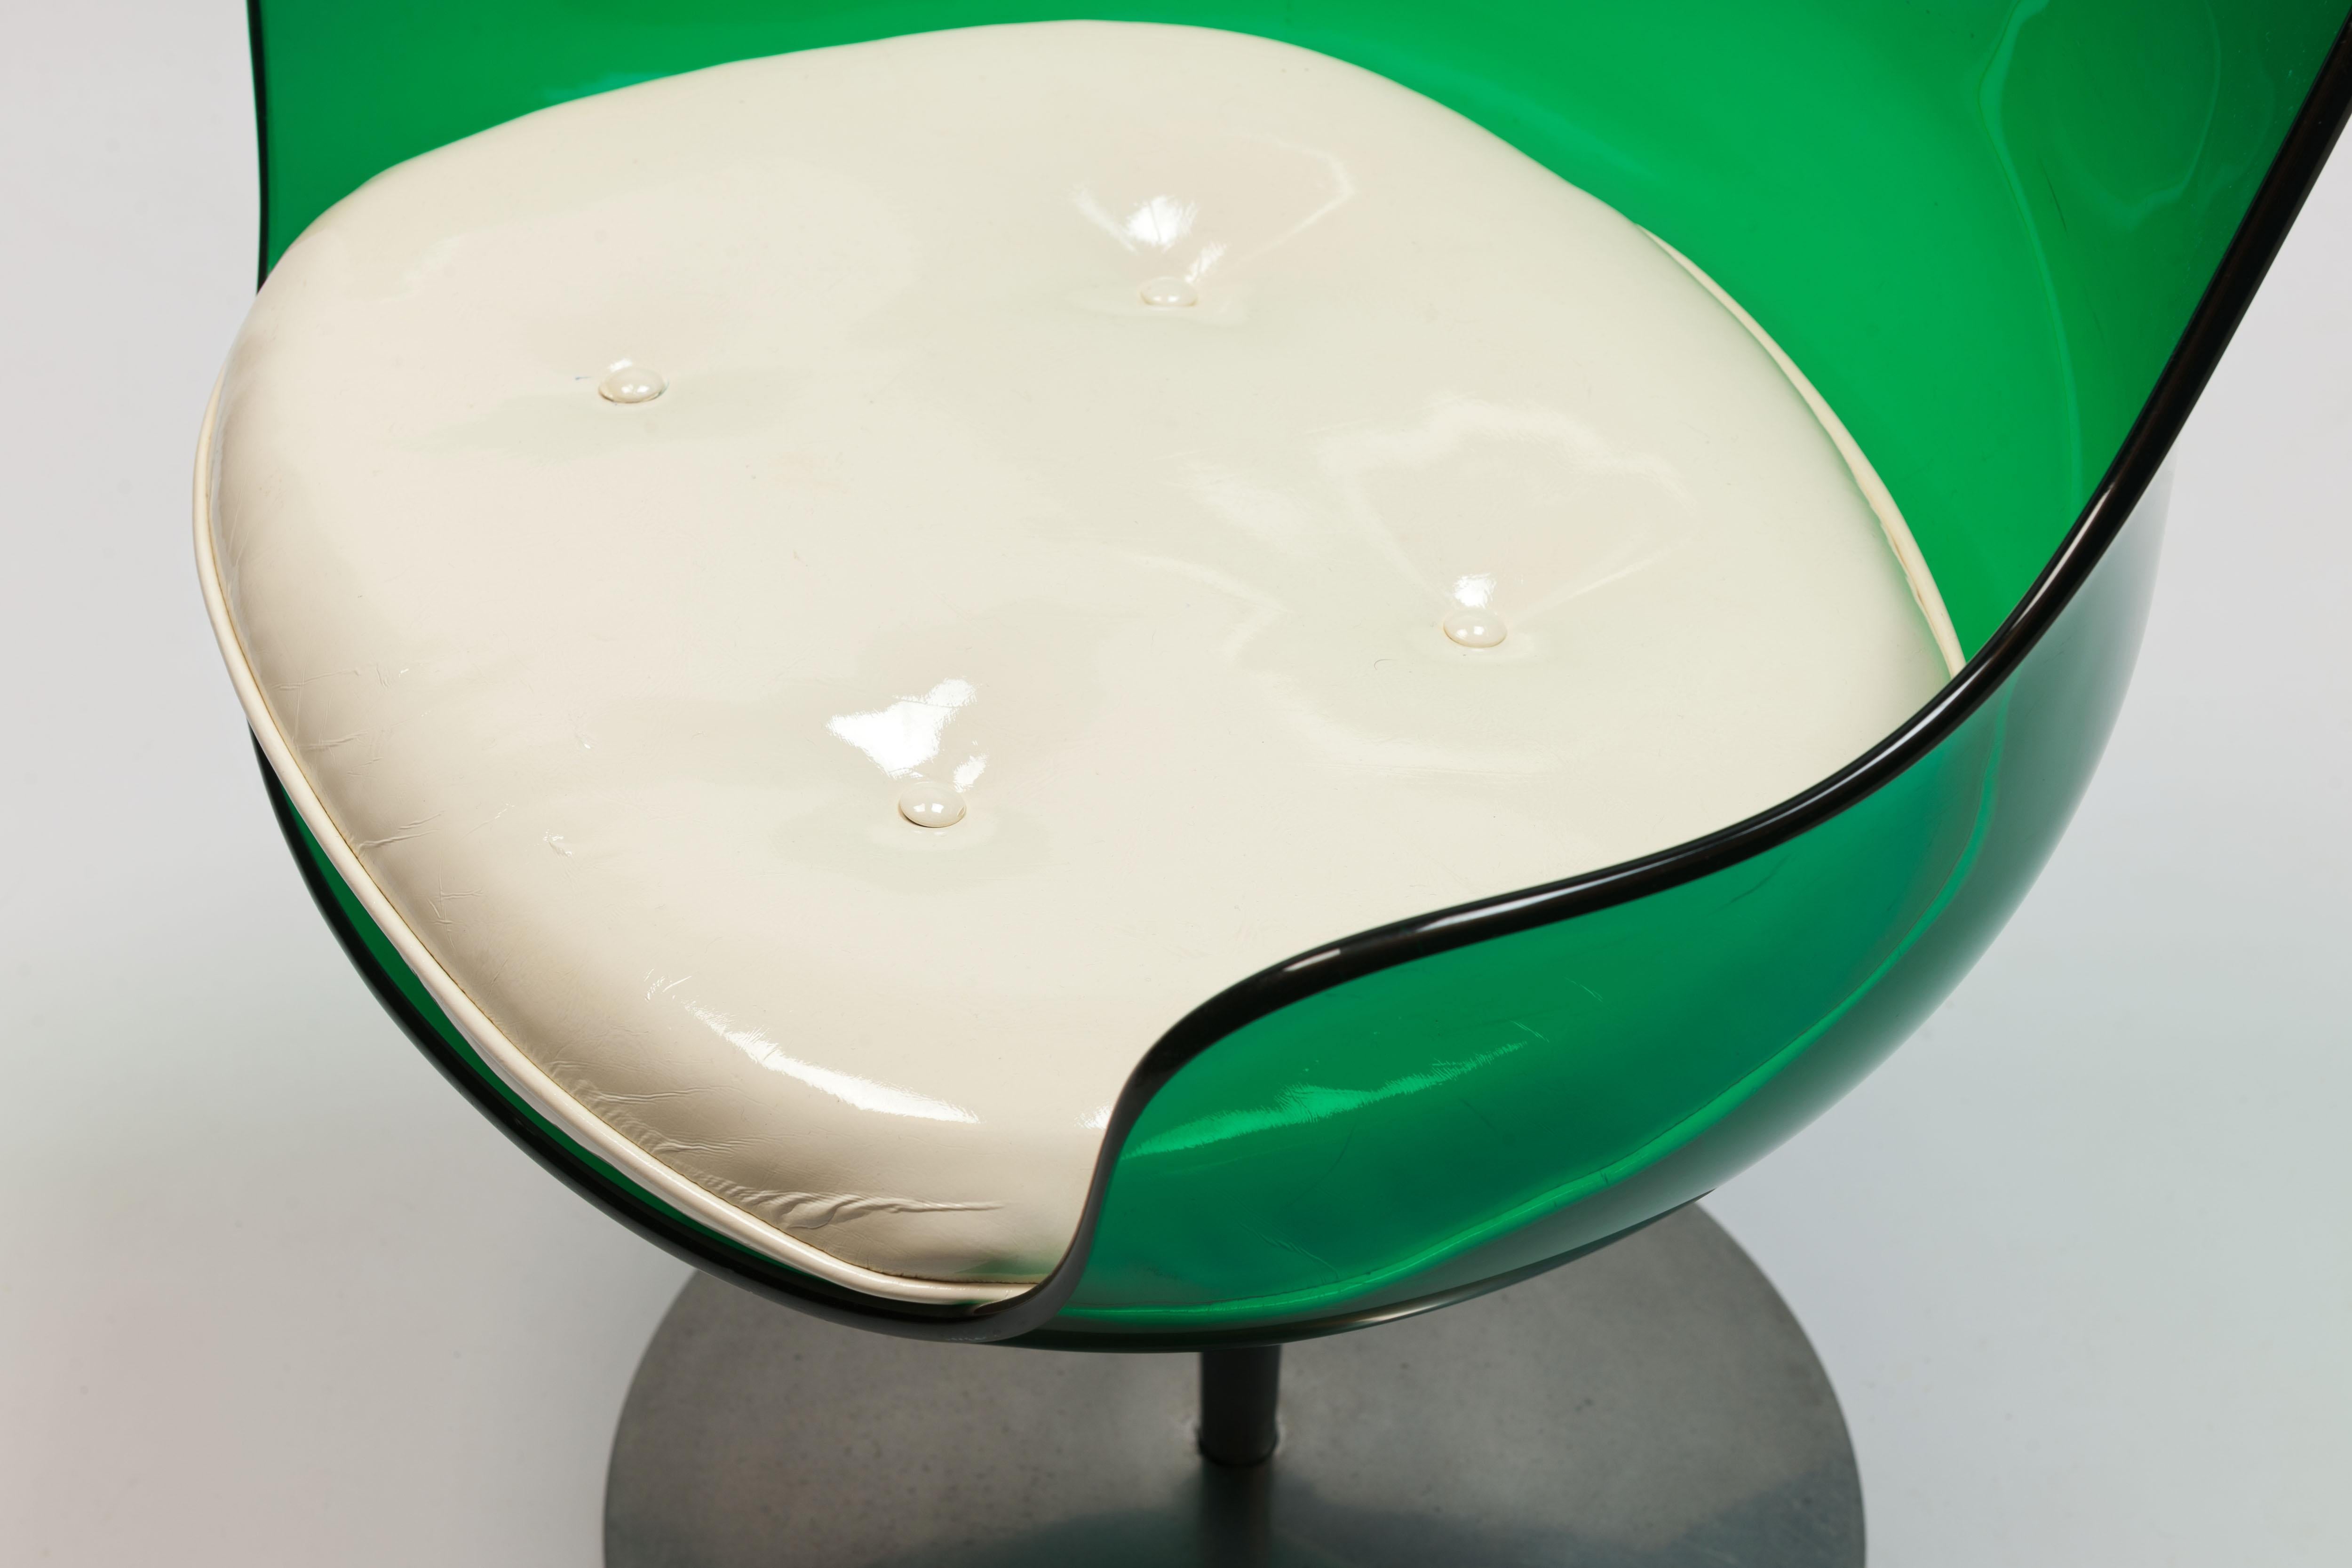 Rare Green Edition 'Champagne' Chair by Estelle & Erwin Laverne 2